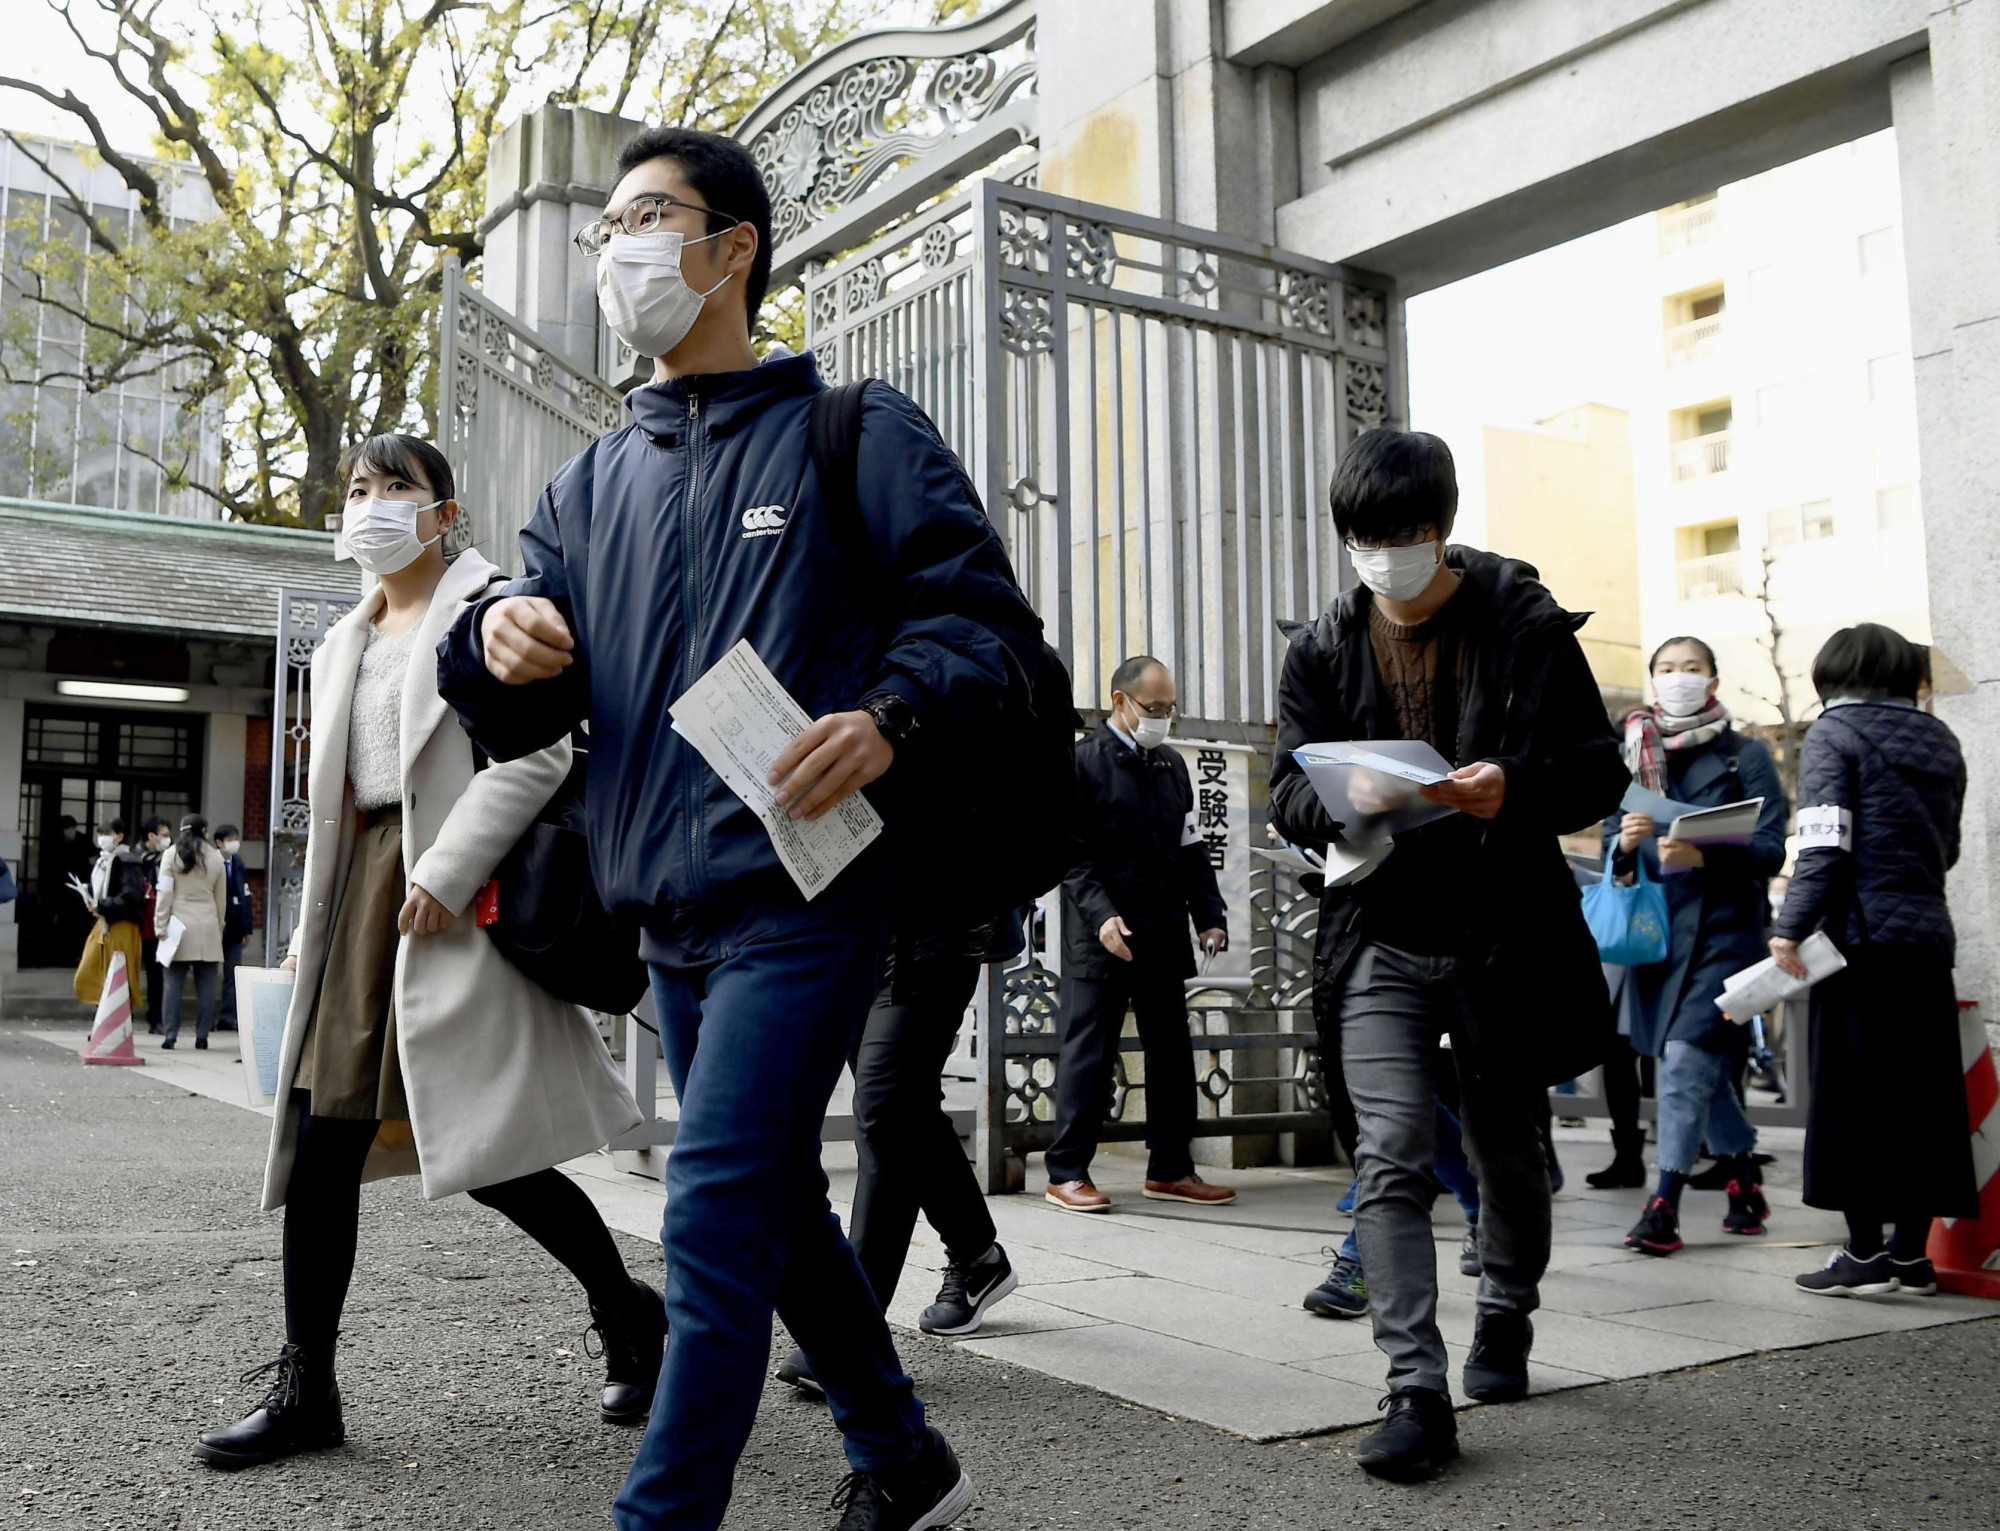 Students wearing masks arrive at the University of Tokyo to take entrance exams on Tuesday. | KYODO